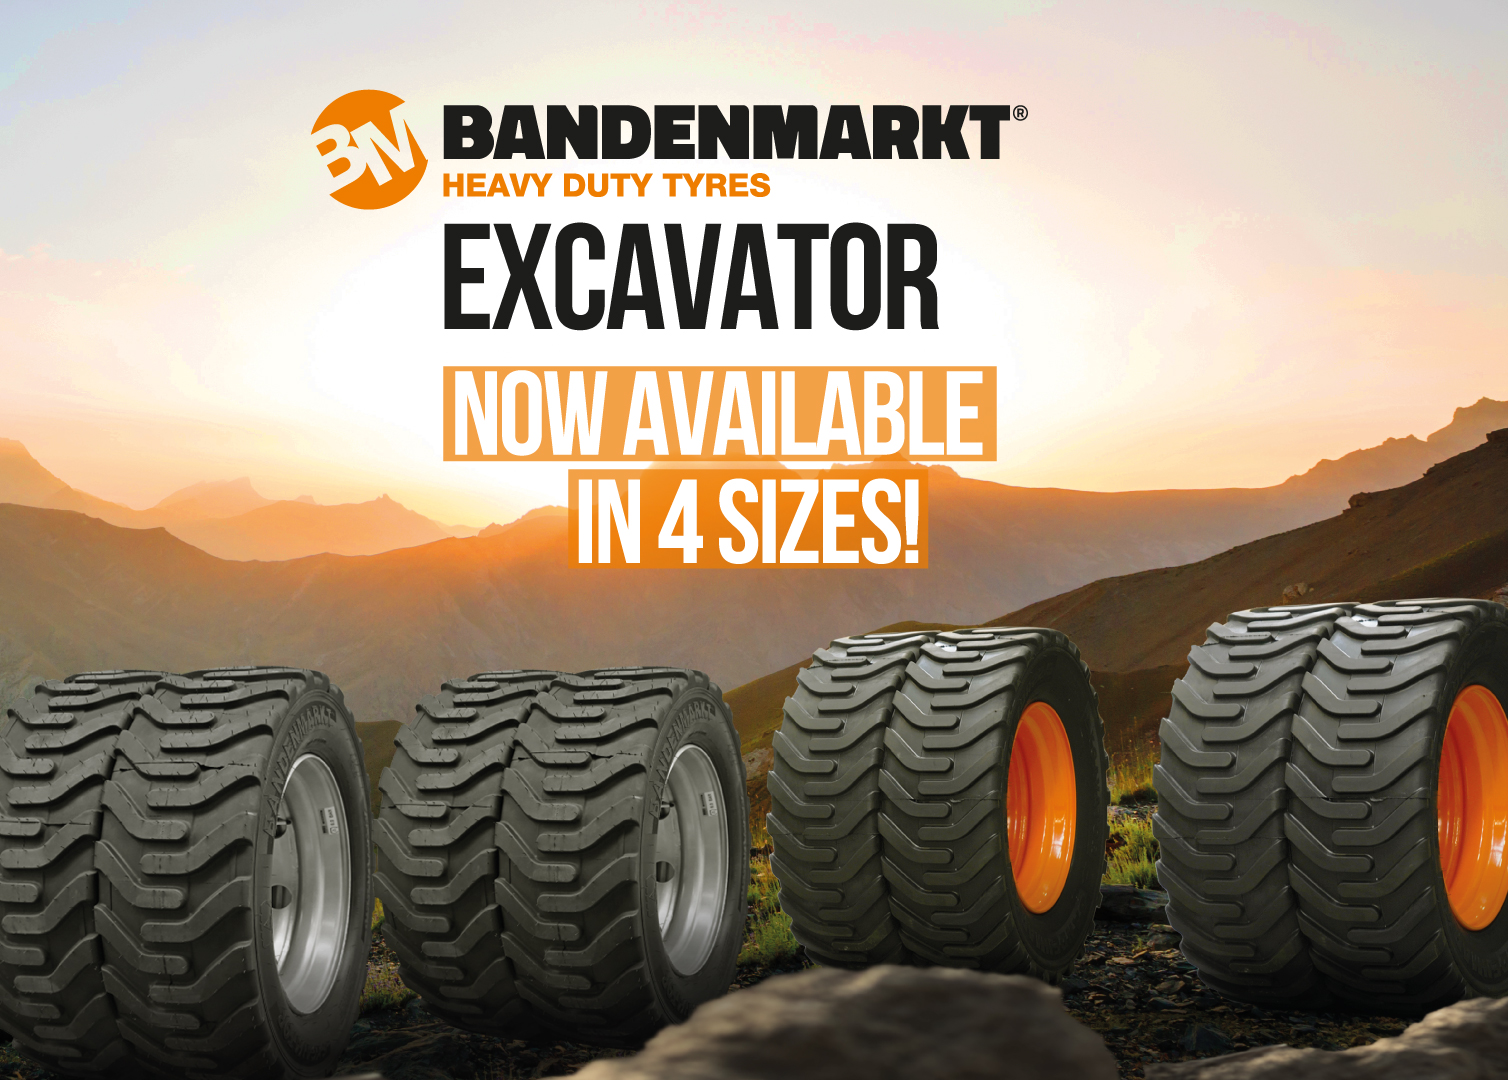 The perfect dual assembly tyres for your Excavator